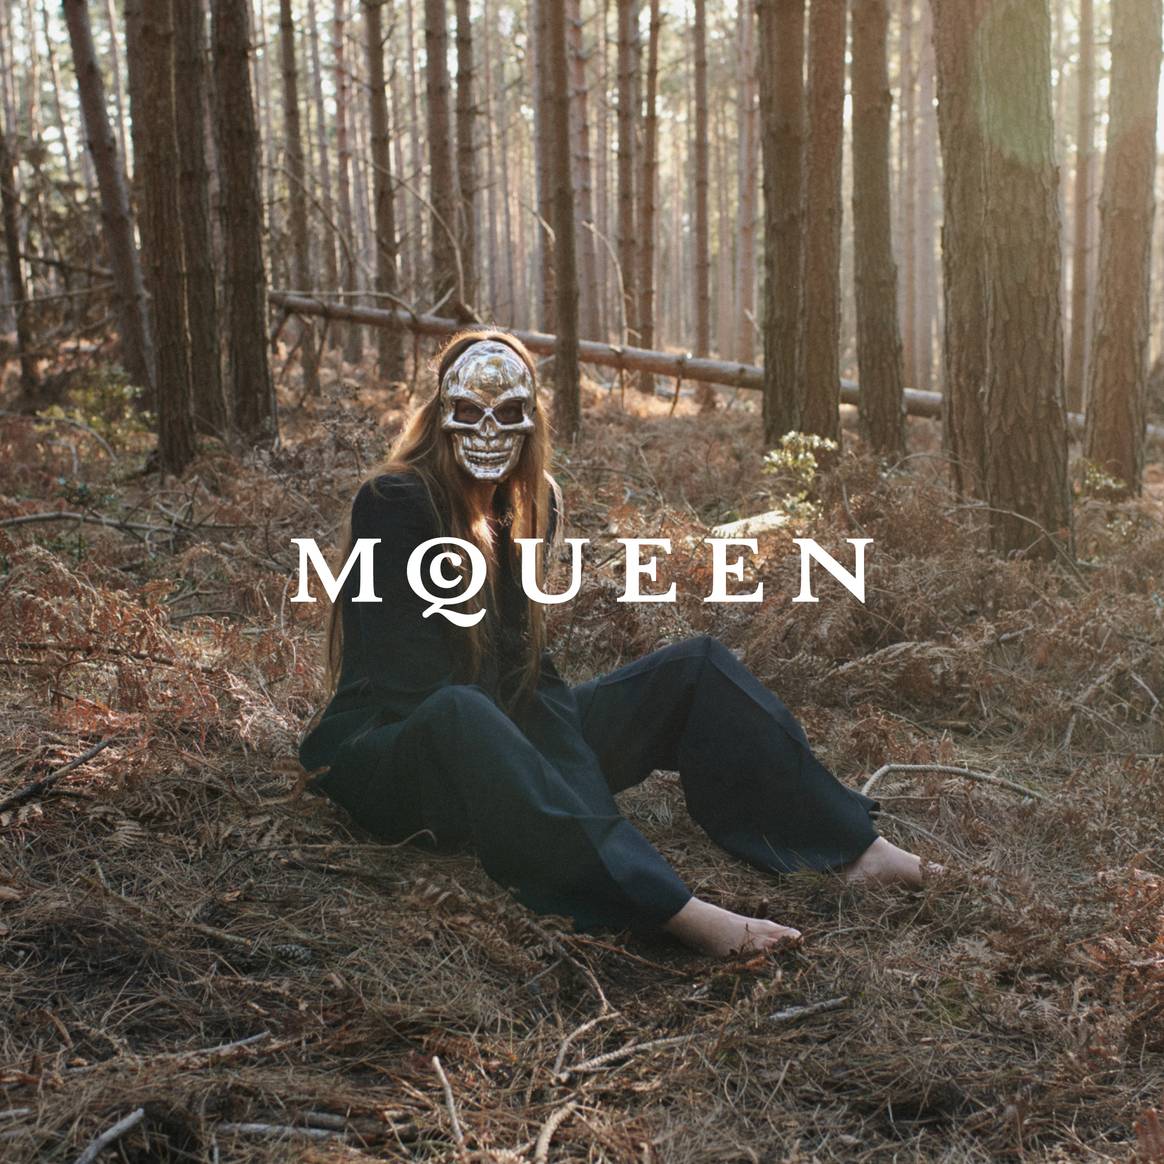 Campaign image from Seán McGirr's AW24 debut collection for Alexander McQueen